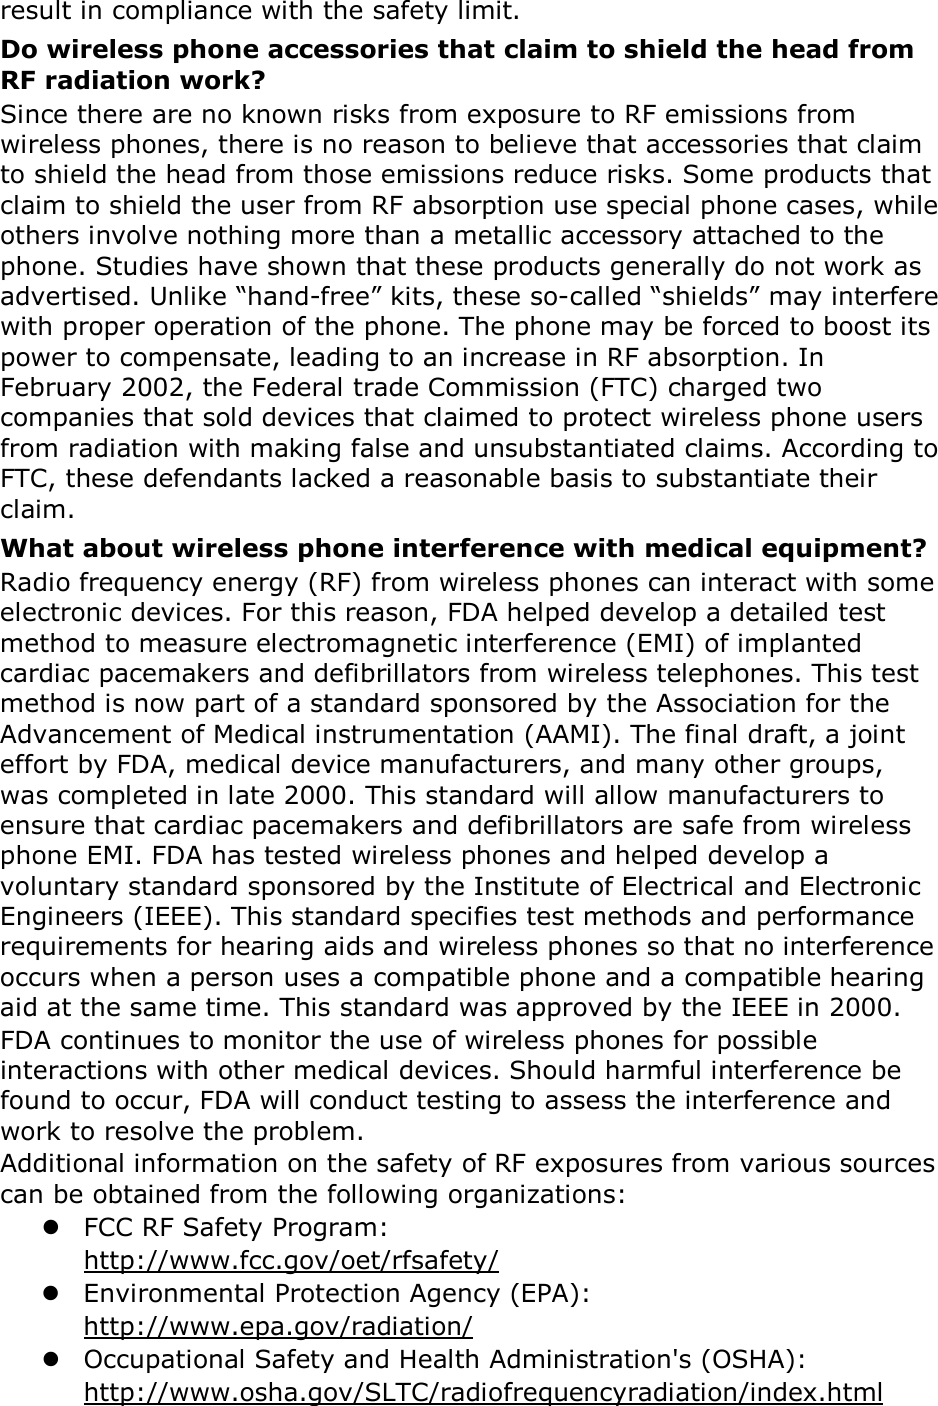 result in compliance with the safety limit. Do wireless phone accessories that claim to shield the head from RF radiation work? Since there are no known risks from exposure to RF emissions from wireless phones, there is no reason to believe that accessories that claim to shield the head from those emissions reduce risks. Some products that claim to shield the user from RF absorption use special phone cases, while others involve nothing more than a metallic accessory attached to the phone. Studies have shown that these products generally do not work as advertised. Unlike “hand-free” kits, these so-called “shields” may interfere with proper operation of the phone. The phone may be forced to boost its power to compensate, leading to an increase in RF absorption. In February 2002, the Federal trade Commission (FTC) charged two companies that sold devices that claimed to protect wireless phone users from radiation with making false and unsubstantiated claims. According to FTC, these defendants lacked a reasonable basis to substantiate their claim. What about wireless phone interference with medical equipment? Radio frequency energy (RF) from wireless phones can interact with some electronic devices. For this reason, FDA helped develop a detailed test method to measure electromagnetic interference (EMI) of implanted cardiac pacemakers and defibrillators from wireless telephones. This test method is now part of a standard sponsored by the Association for the Advancement of Medical instrumentation (AAMI). The final draft, a joint effort by FDA, medical device manufacturers, and many other groups, was completed in late 2000. This standard will allow manufacturers to ensure that cardiac pacemakers and defibrillators are safe from wireless phone EMI. FDA has tested wireless phones and helped develop a voluntary standard sponsored by the Institute of Electrical and Electronic Engineers (IEEE). This standard specifies test methods and performance requirements for hearing aids and wireless phones so that no interference occurs when a person uses a compatible phone and a compatible hearing aid at the same time. This standard was approved by the IEEE in 2000. FDA continues to monitor the use of wireless phones for possible interactions with other medical devices. Should harmful interference be found to occur, FDA will conduct testing to assess the interference and work to resolve the problem. Additional information on the safety of RF exposures from various sources can be obtained from the following organizations:  FCC RF Safety Program:   http://www.fcc.gov/oet/rfsafety/  Environmental Protection Agency (EPA):   http://www.epa.gov/radiation/  Occupational Safety and Health Administration&apos;s (OSHA):            http://www.osha.gov/SLTC/radiofrequencyradiation/index.html 